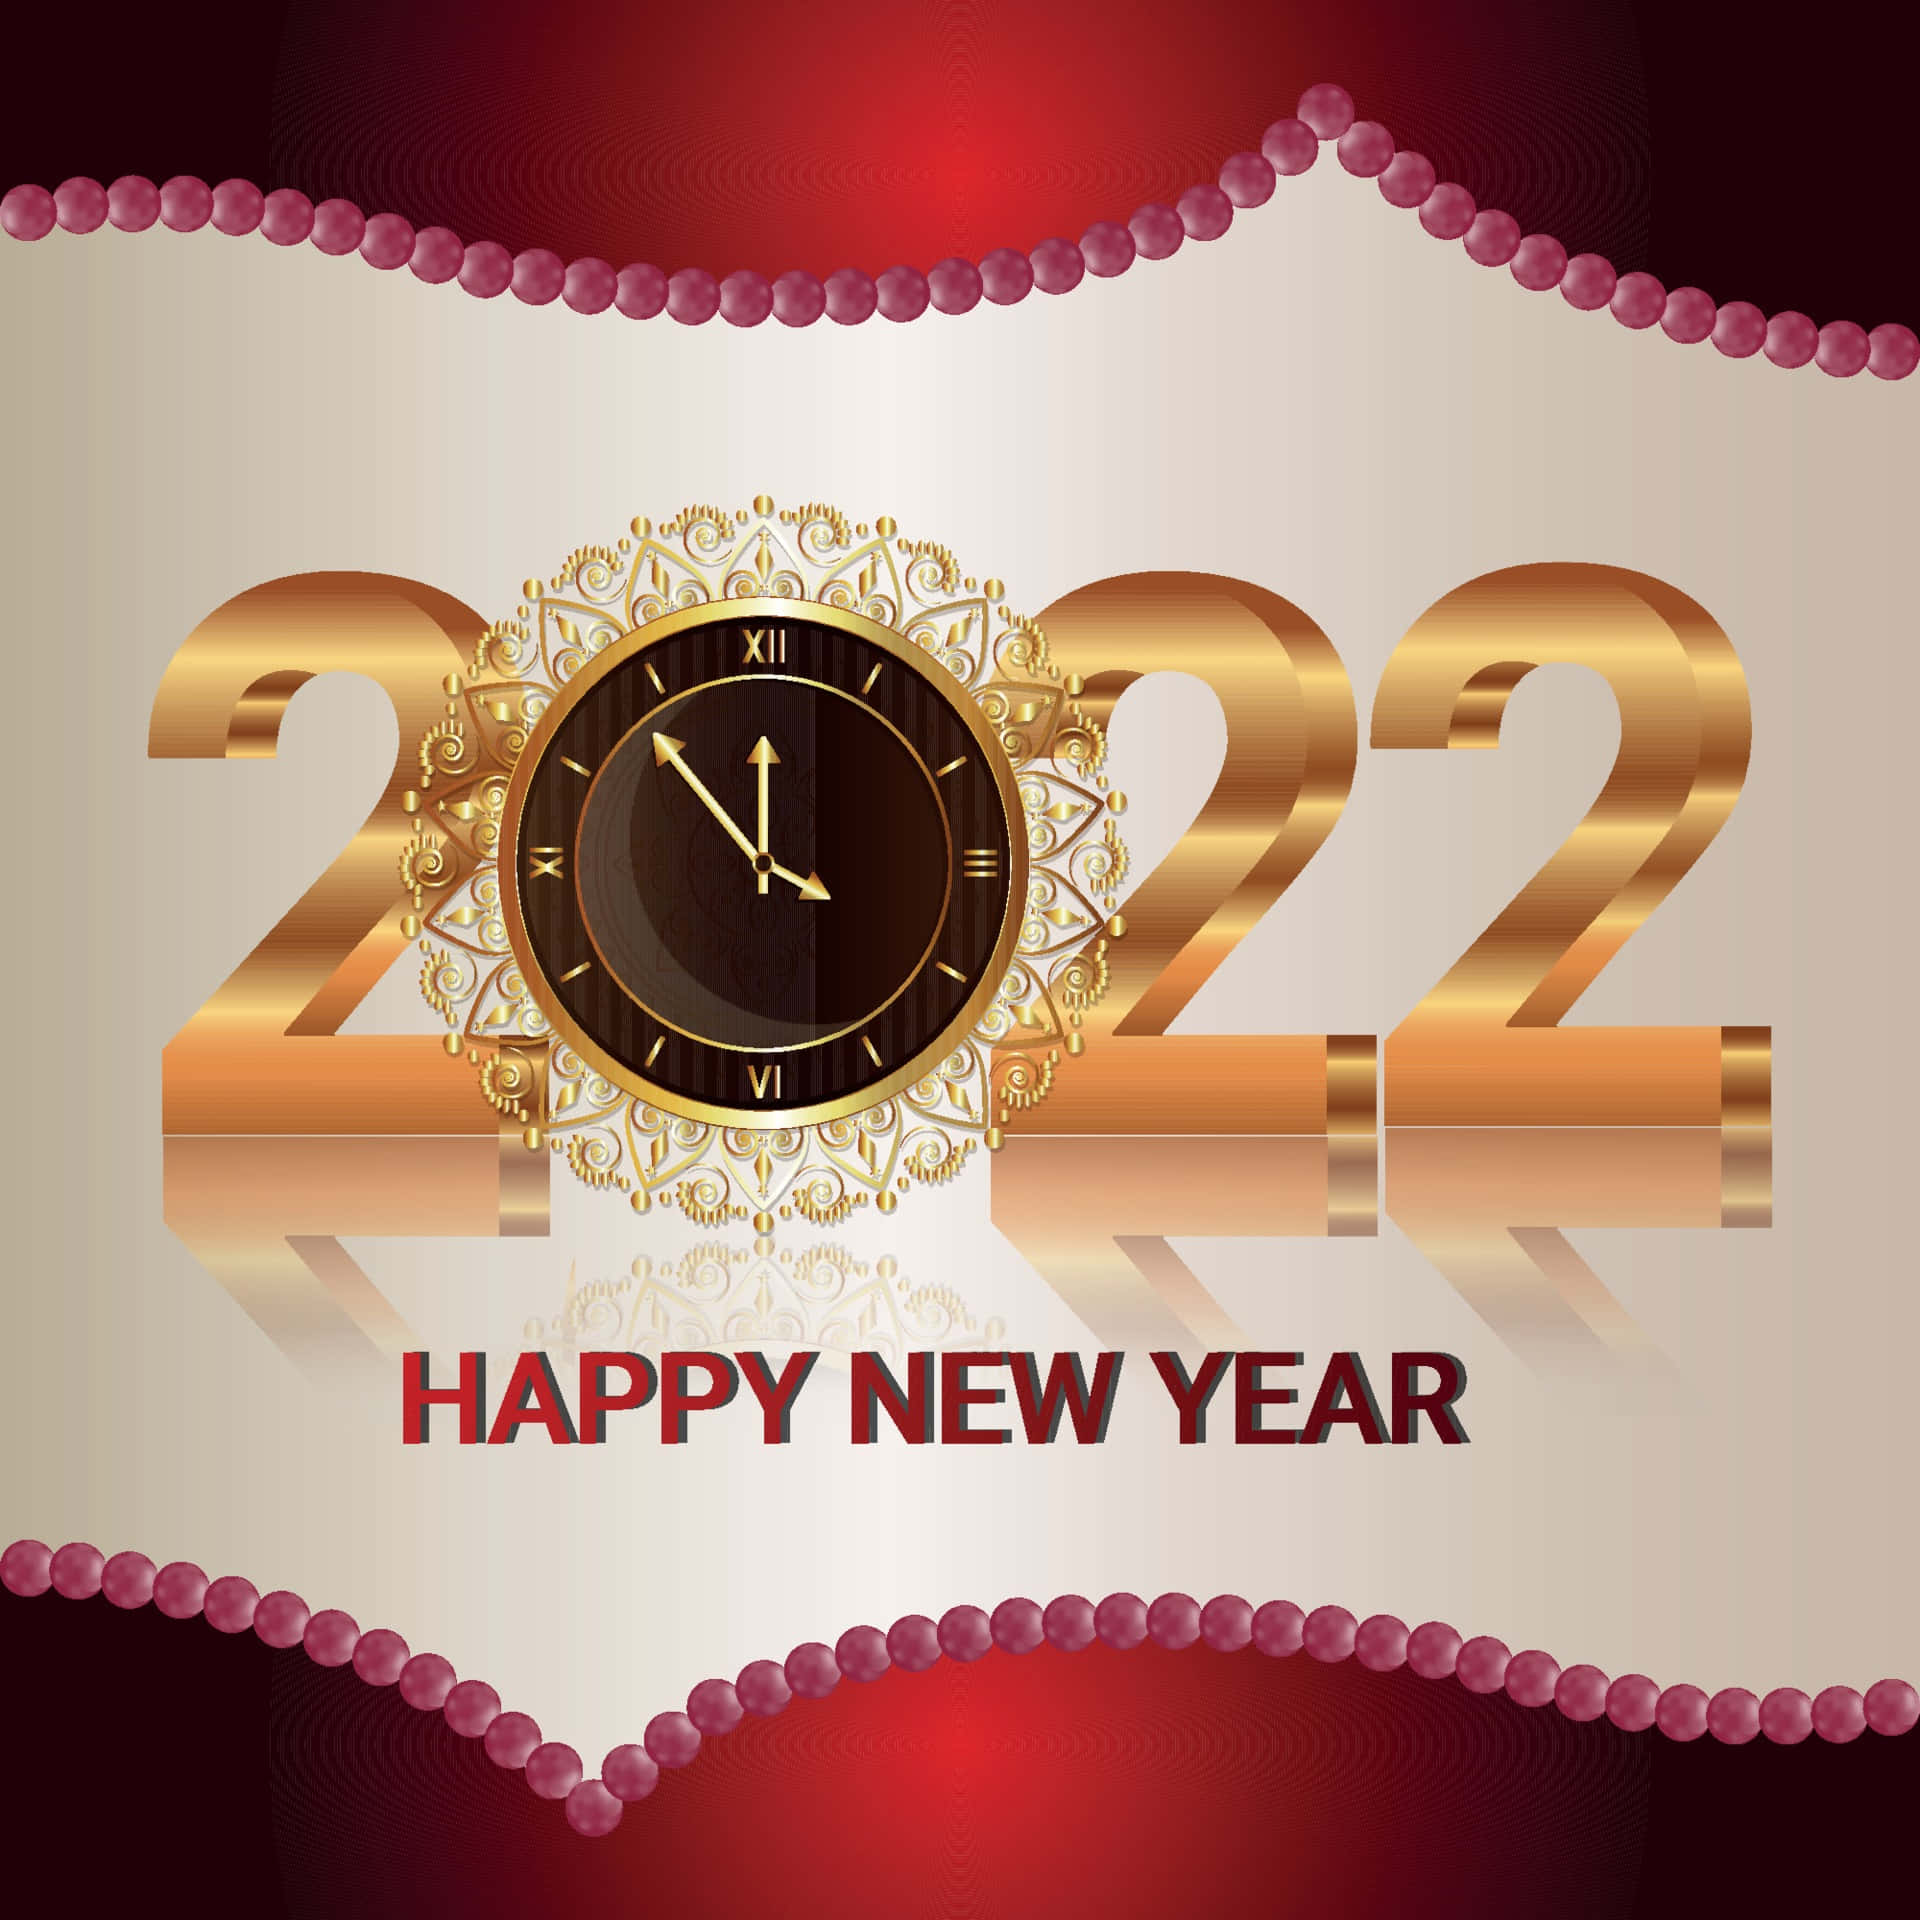 New Year celebrations begin with a joyous 2022!